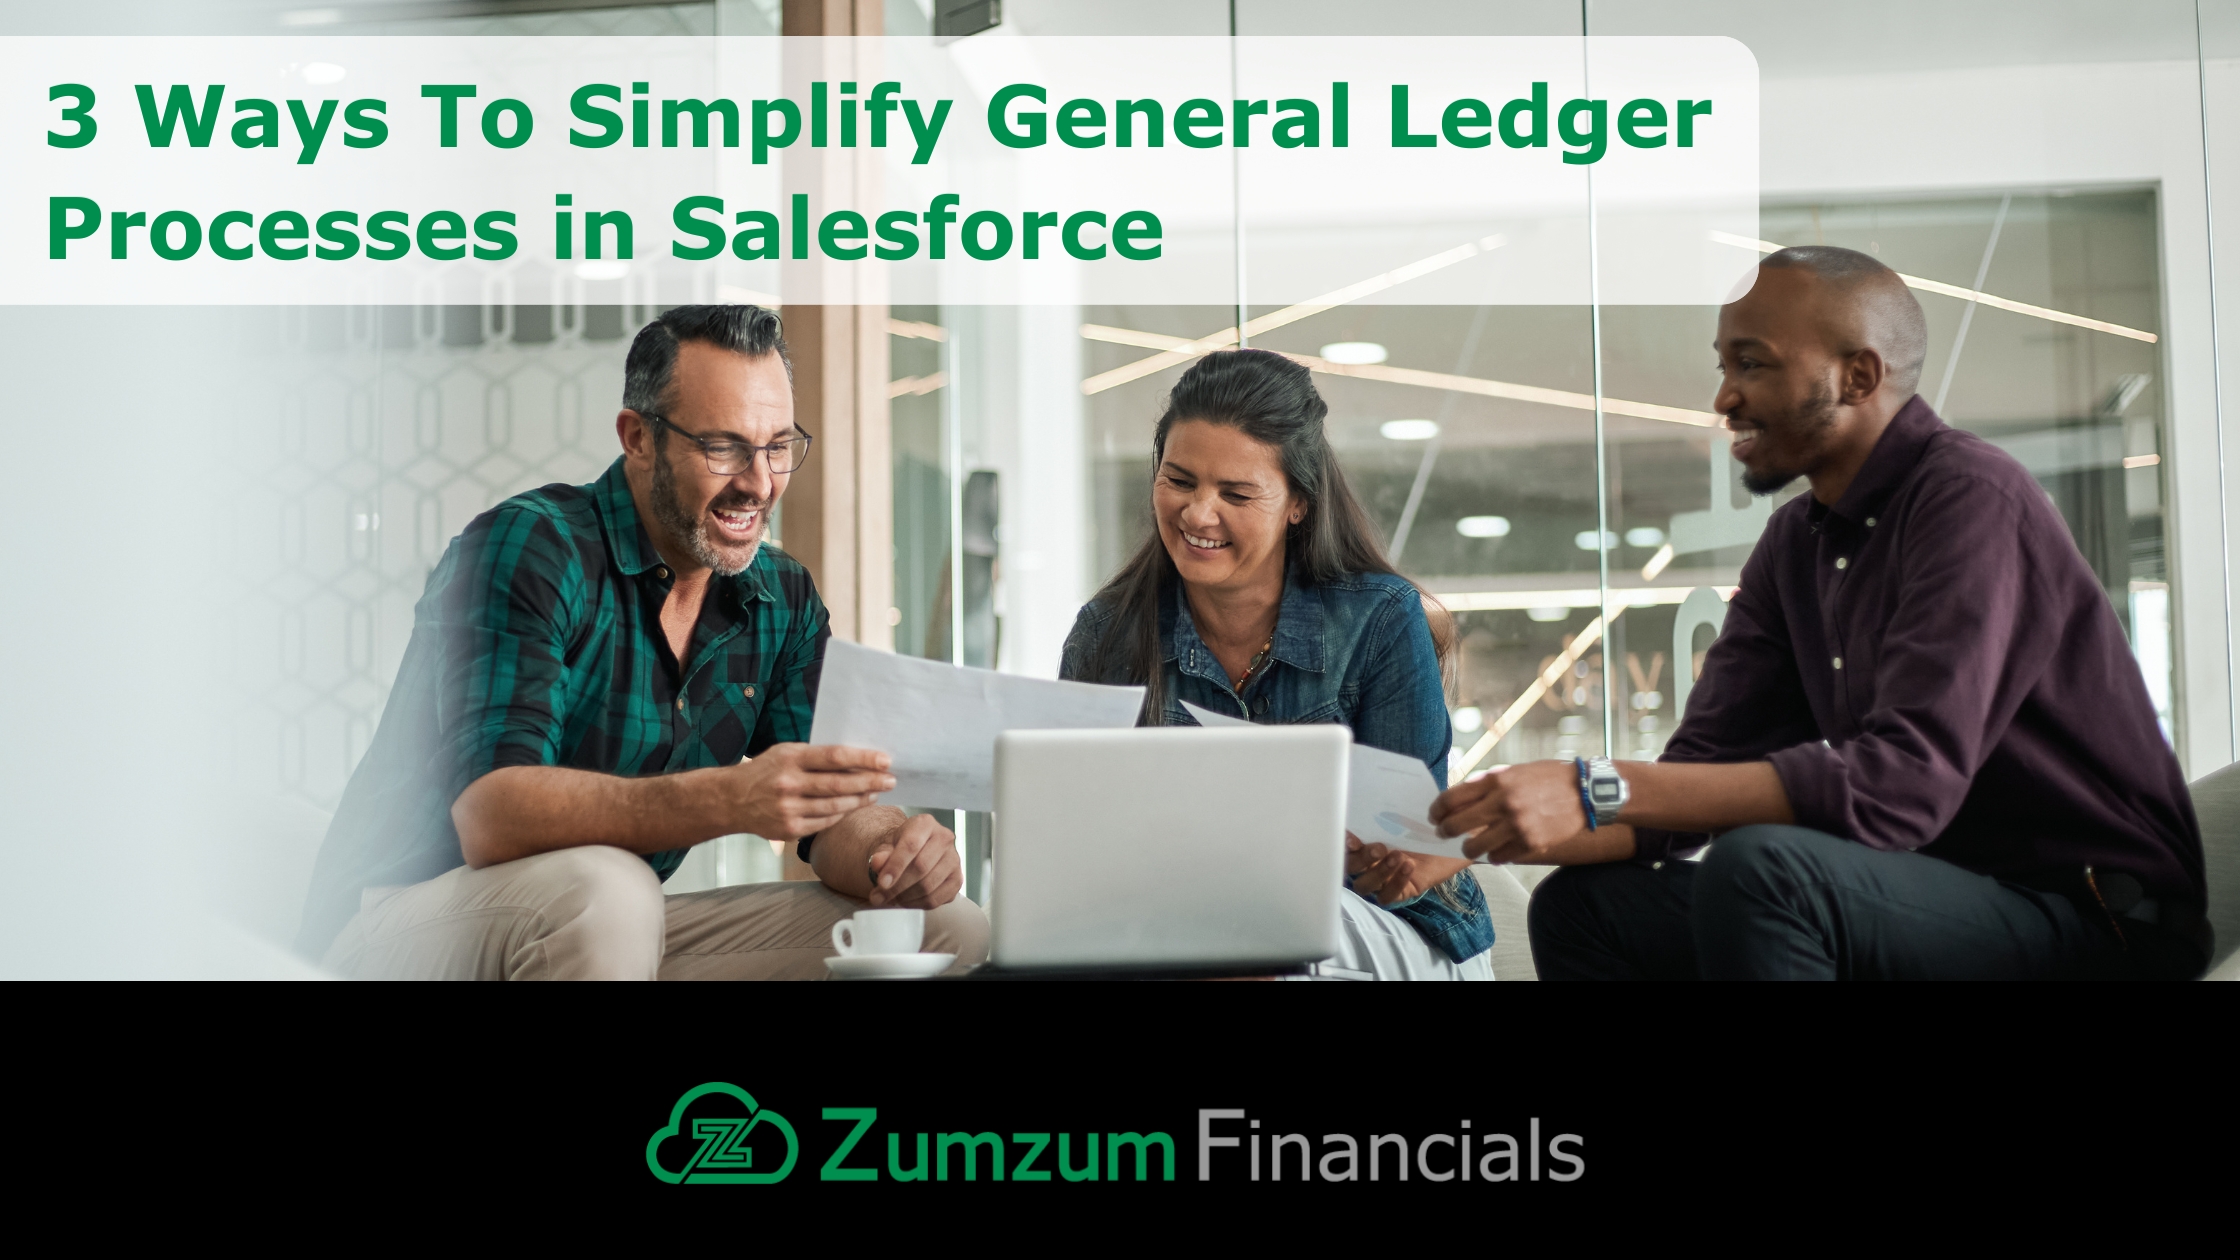 3 Ways To Simplify General Ledger Processes in Salesforce